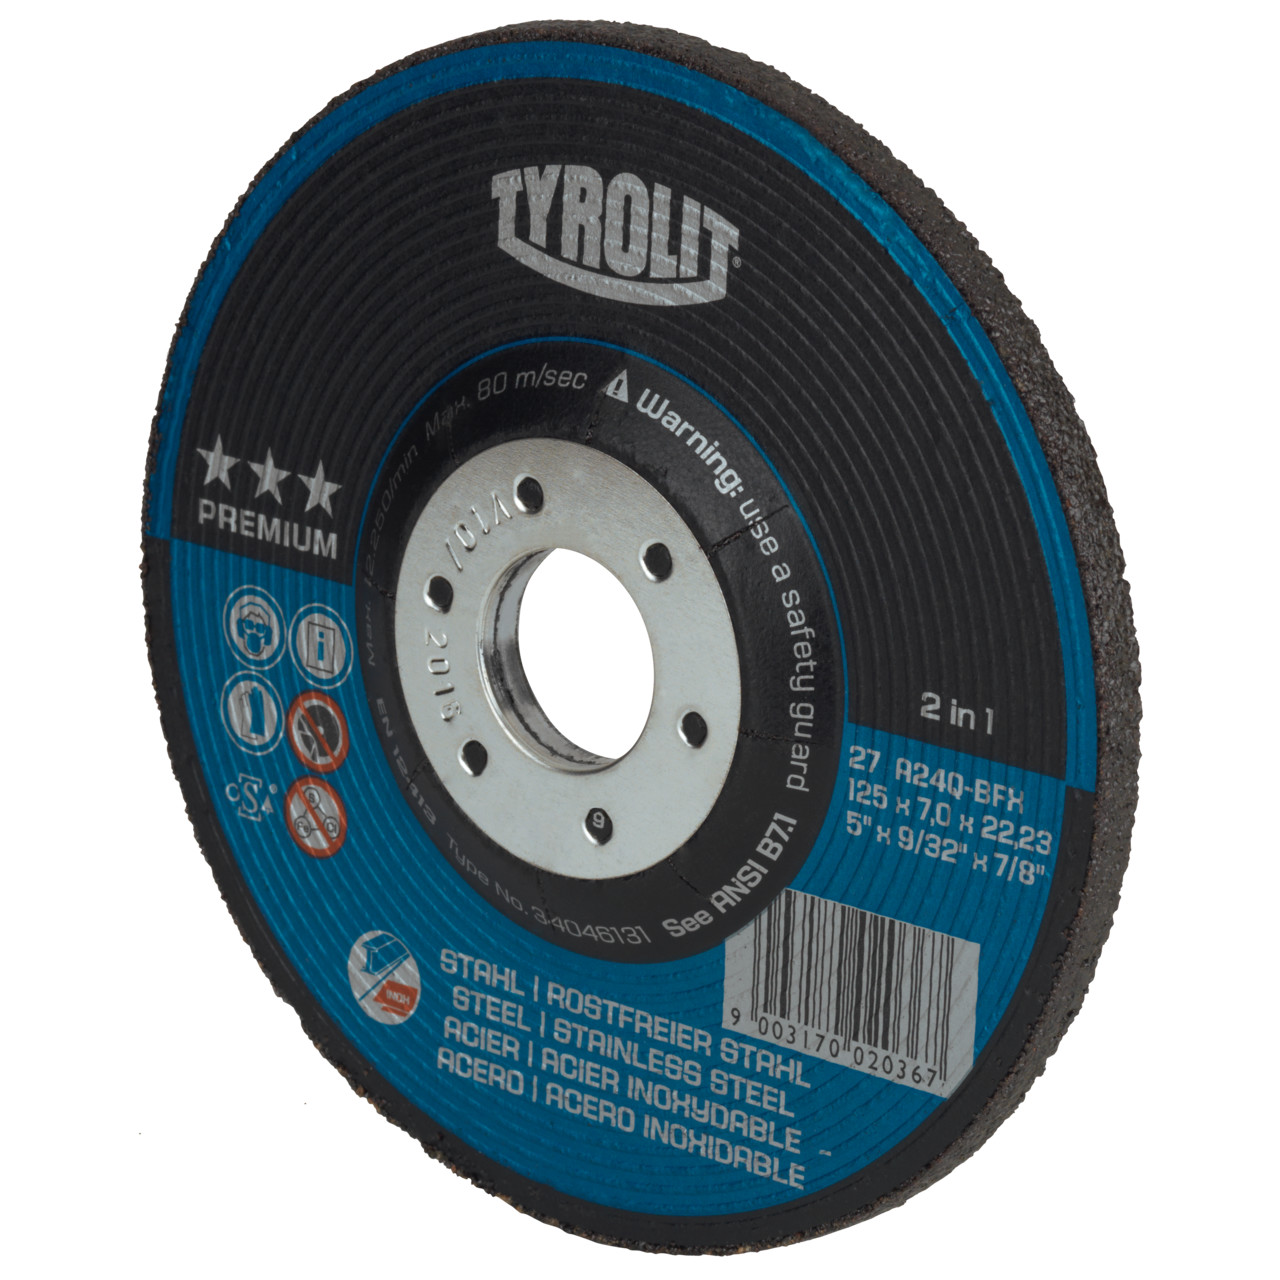 TYROLIT grinding wheel DxUxH 178x8x22.23 2in1 for steel and stainless steel, shape: 27 - offset version, Art. 34046135